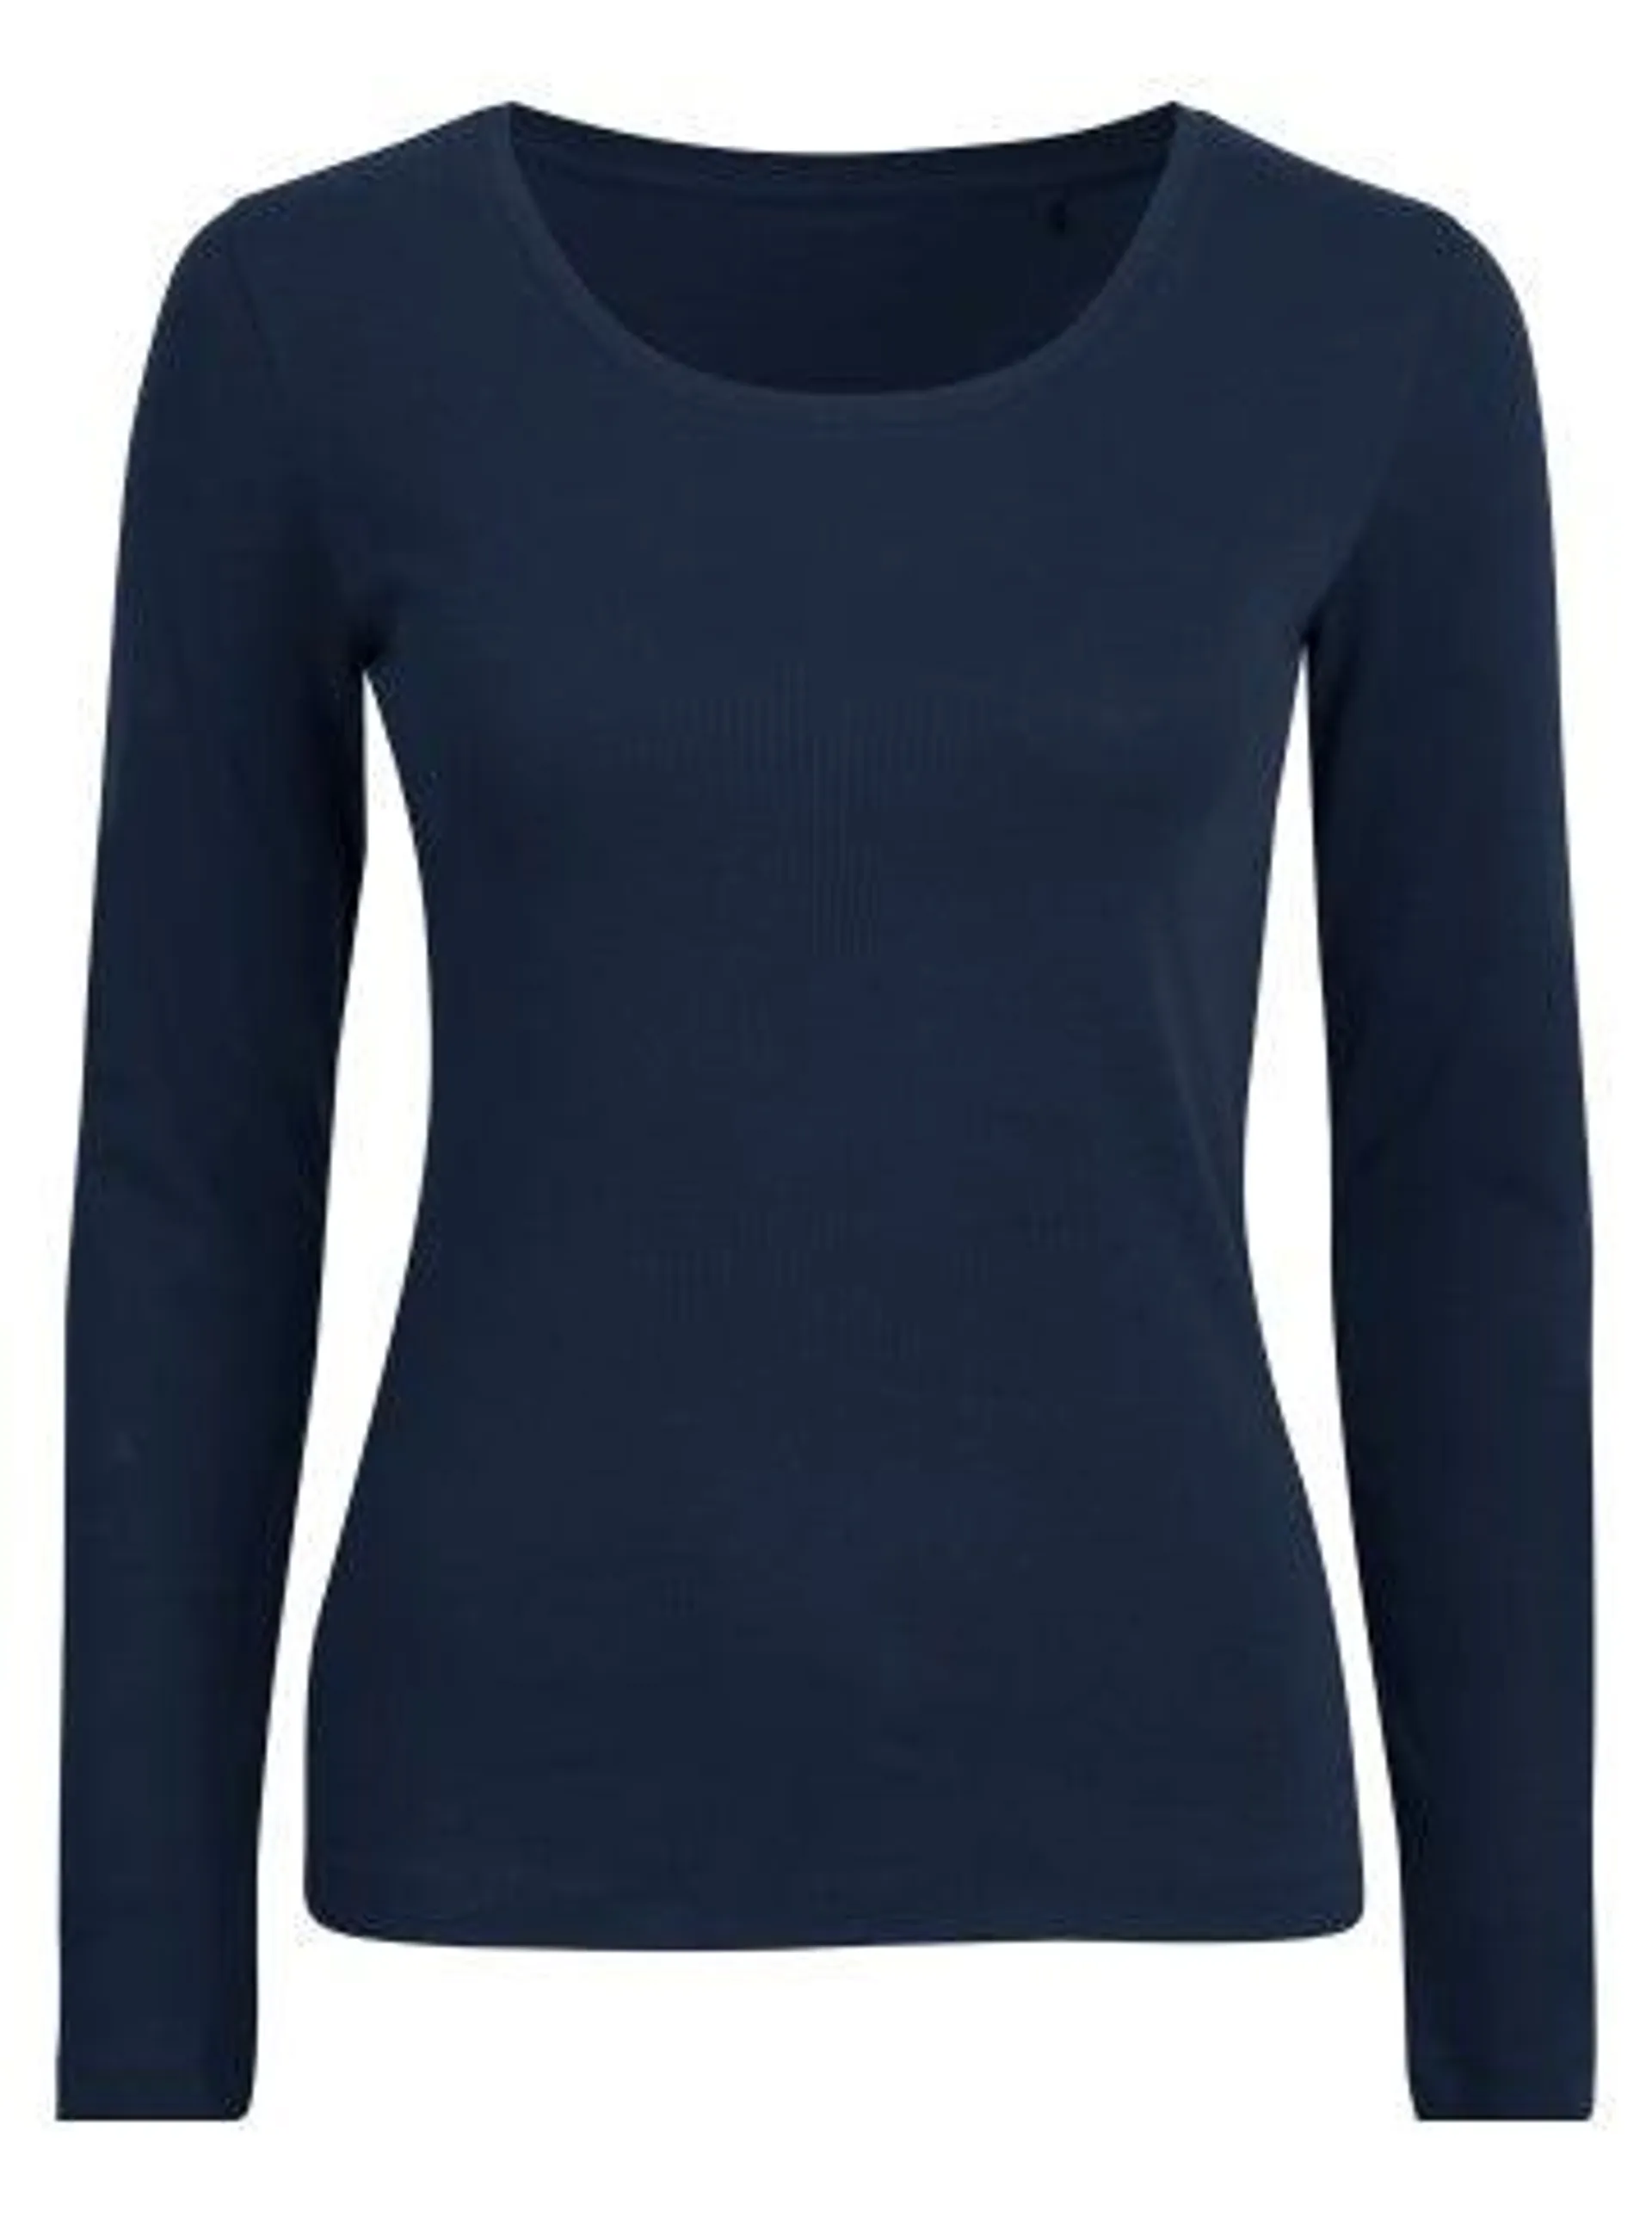 Women's Favourite Long Sleeve Basic Rib Cotton Top in Navy